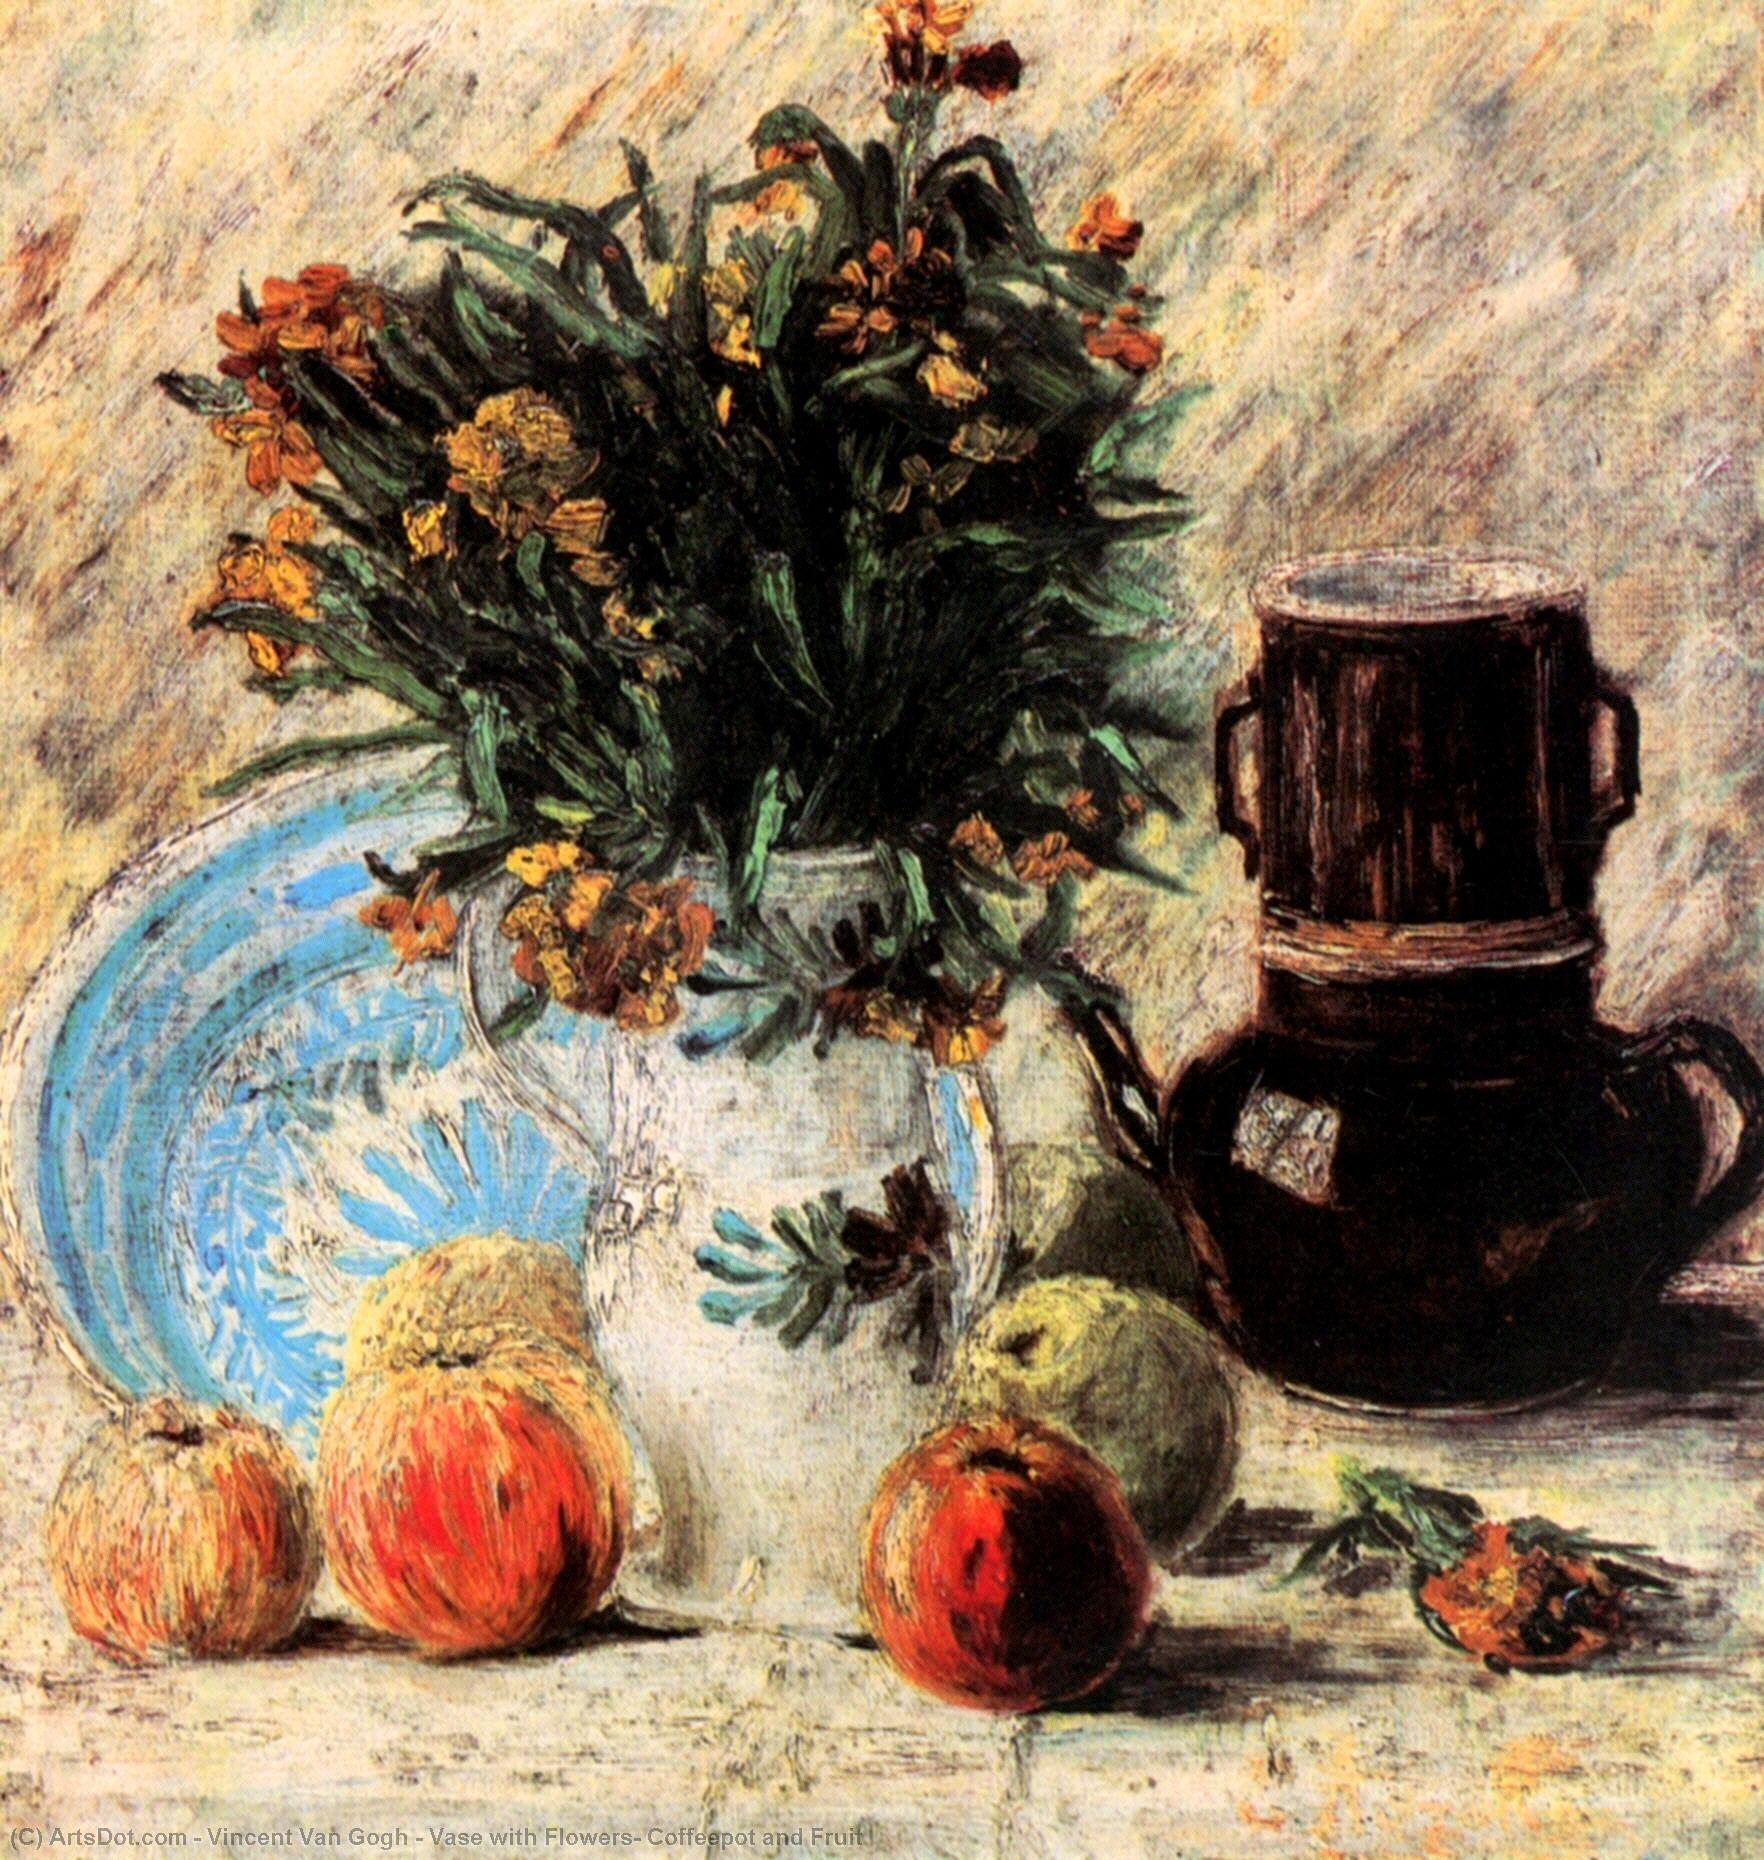 WikiOO.org - Encyclopedia of Fine Arts - Lukisan, Artwork Vincent Van Gogh - Vase with Flowers, Coffeepot and Fruit